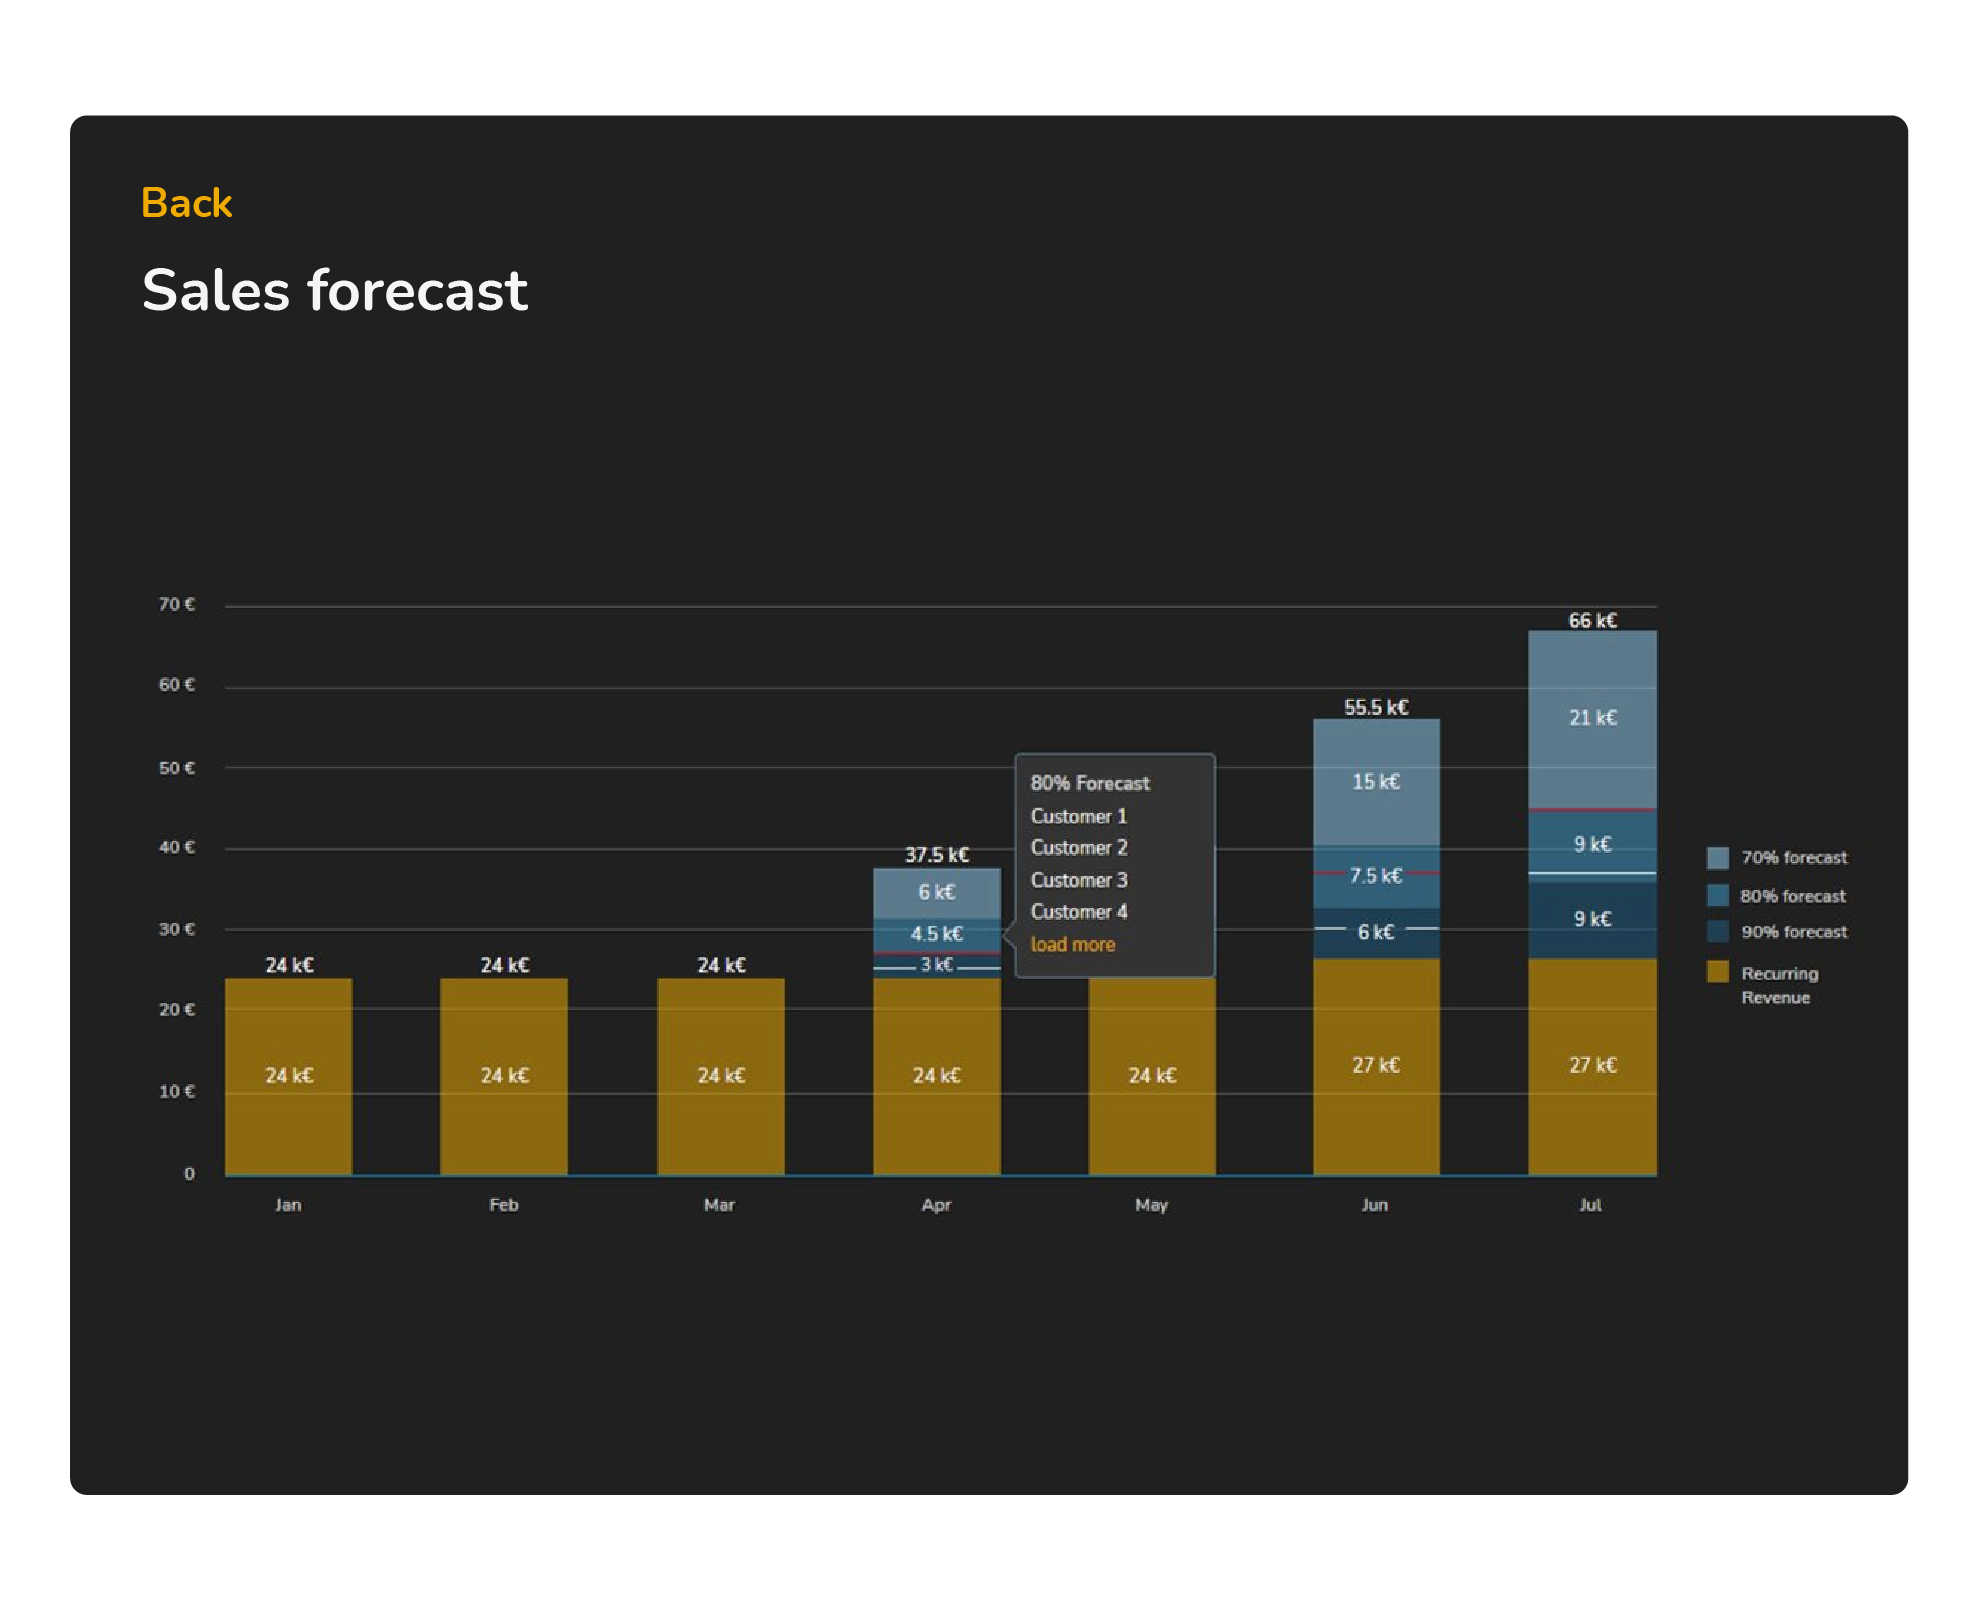 Fortius Partners - Sales forecast